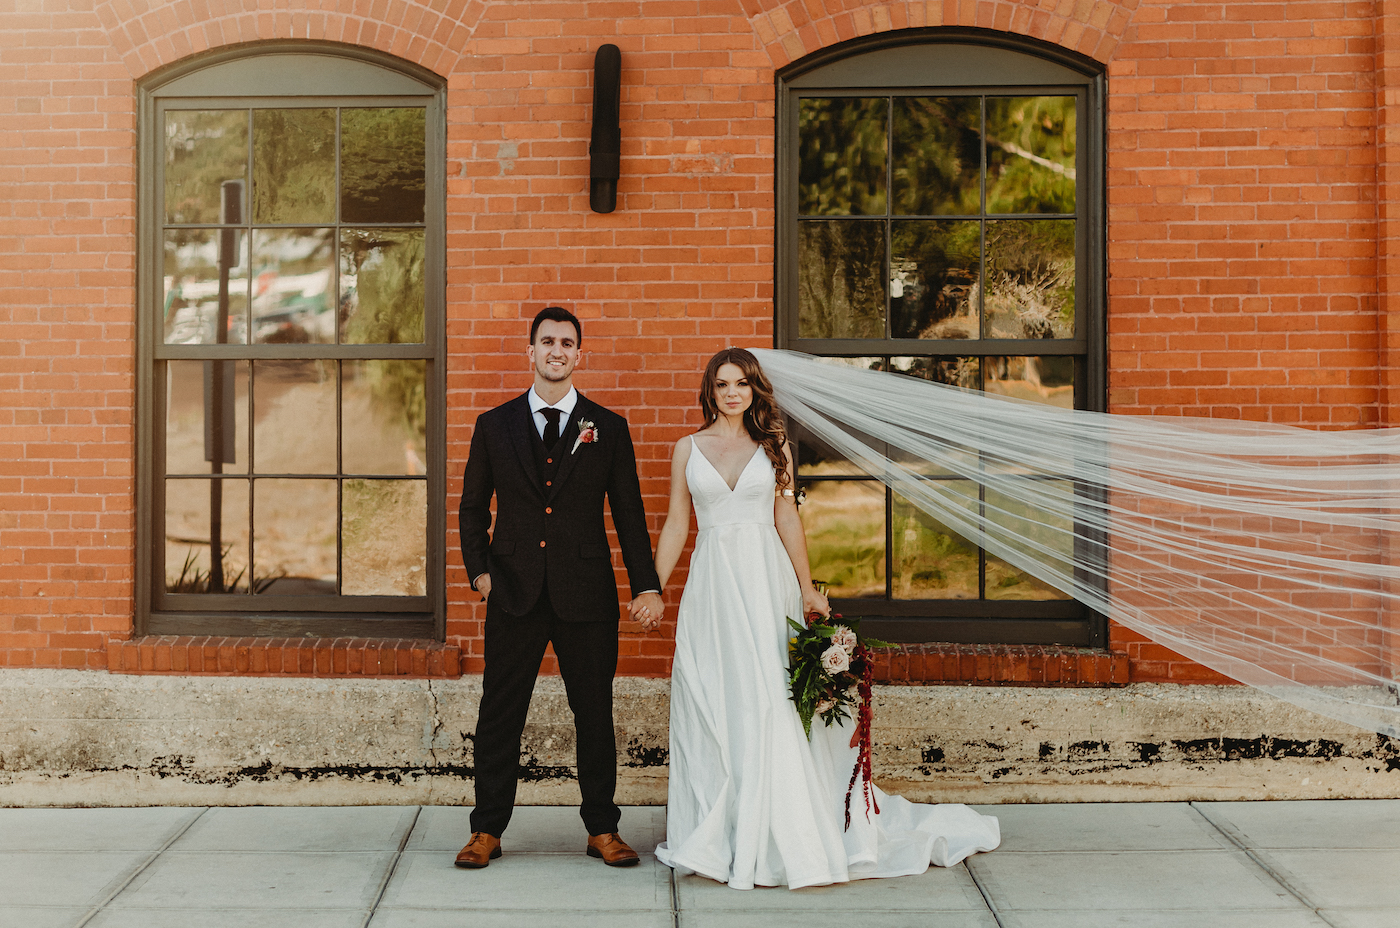 Bride and Groom Outdoor Wedding Portrait Veil Shot In Front Of Brick Wall | Charcoal Grey Wool Groom Suit with Burgundy Maroon Red Neck Tie | Wild Boho Loose Organic Greenery Bridal Bouquet with Ferns Blush Pink Roses and Protea and Red Amaranthus | Dewitt for Love Photography